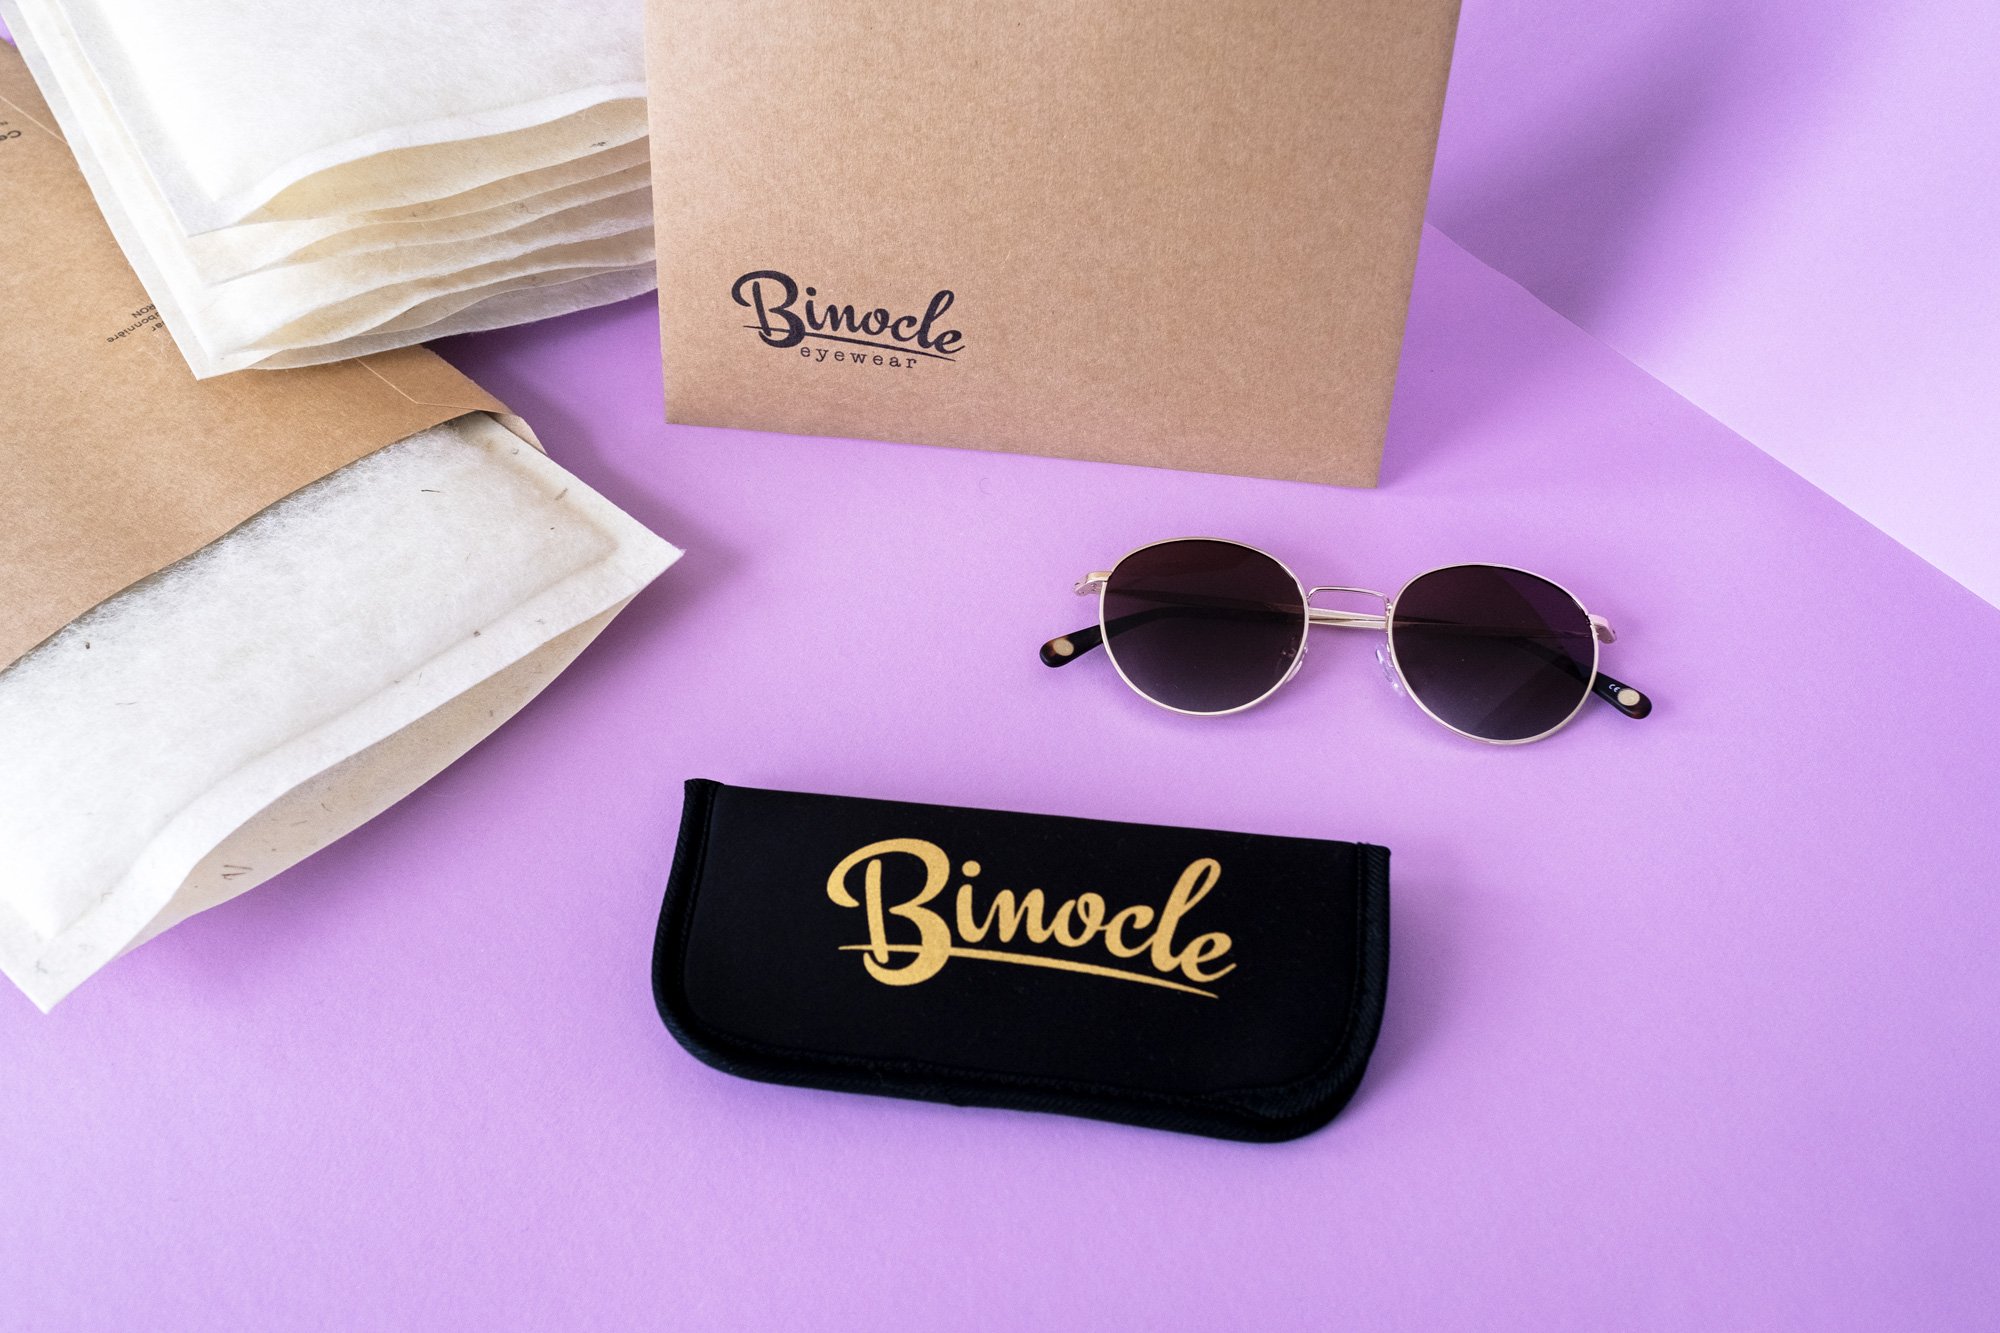 How Binocle shows their commitment to sustainability with Wool Envelopes